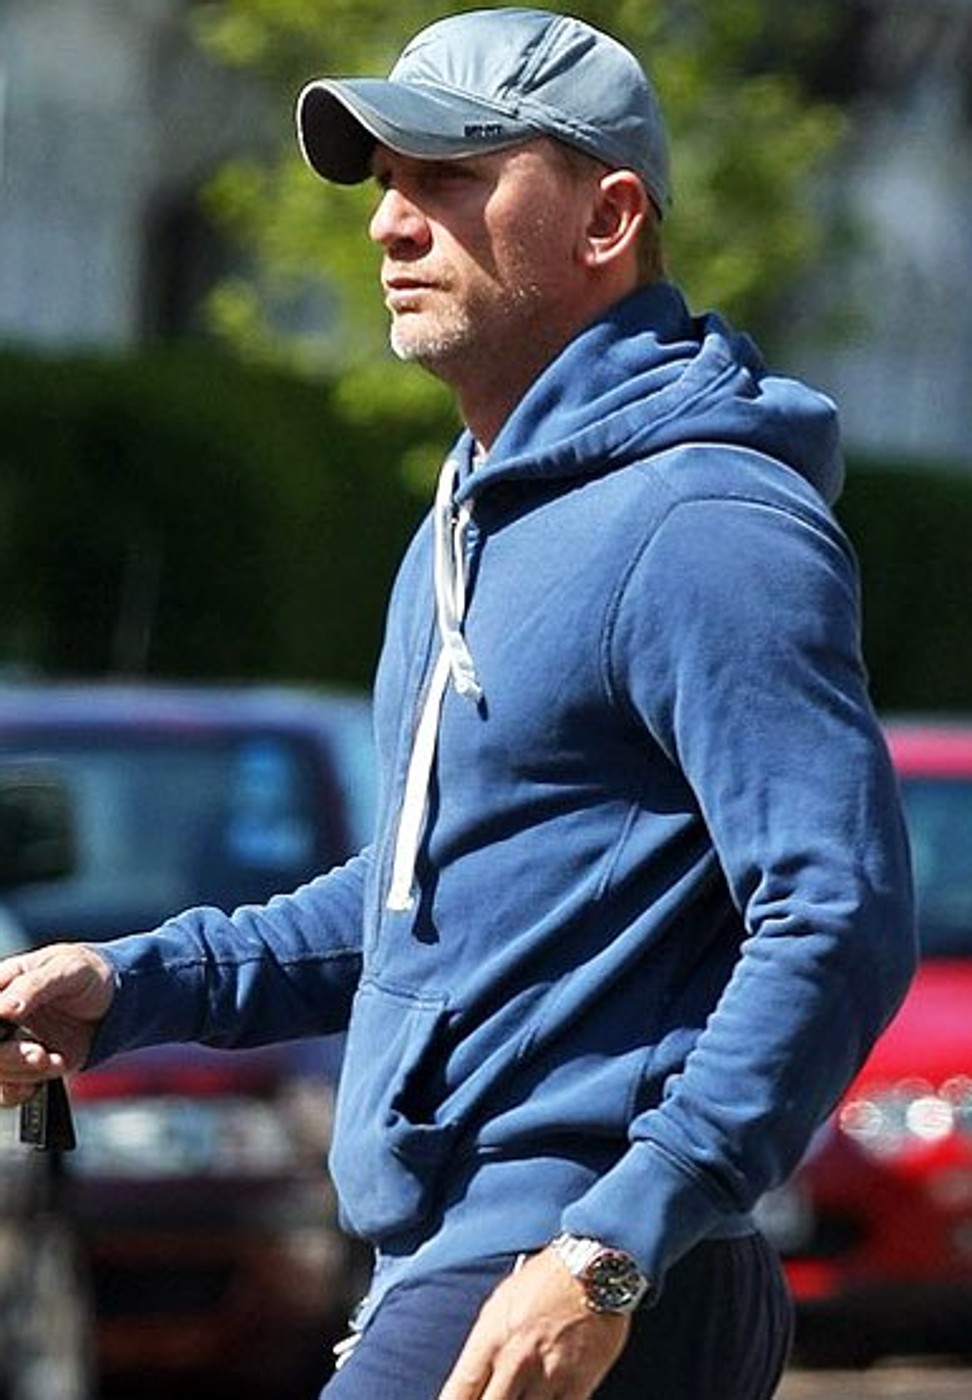 Actor Daniel Craig has been seen wearing a Rolex ‘Pepsi’ off-screen even though he is an ambassador for Omega watches. 